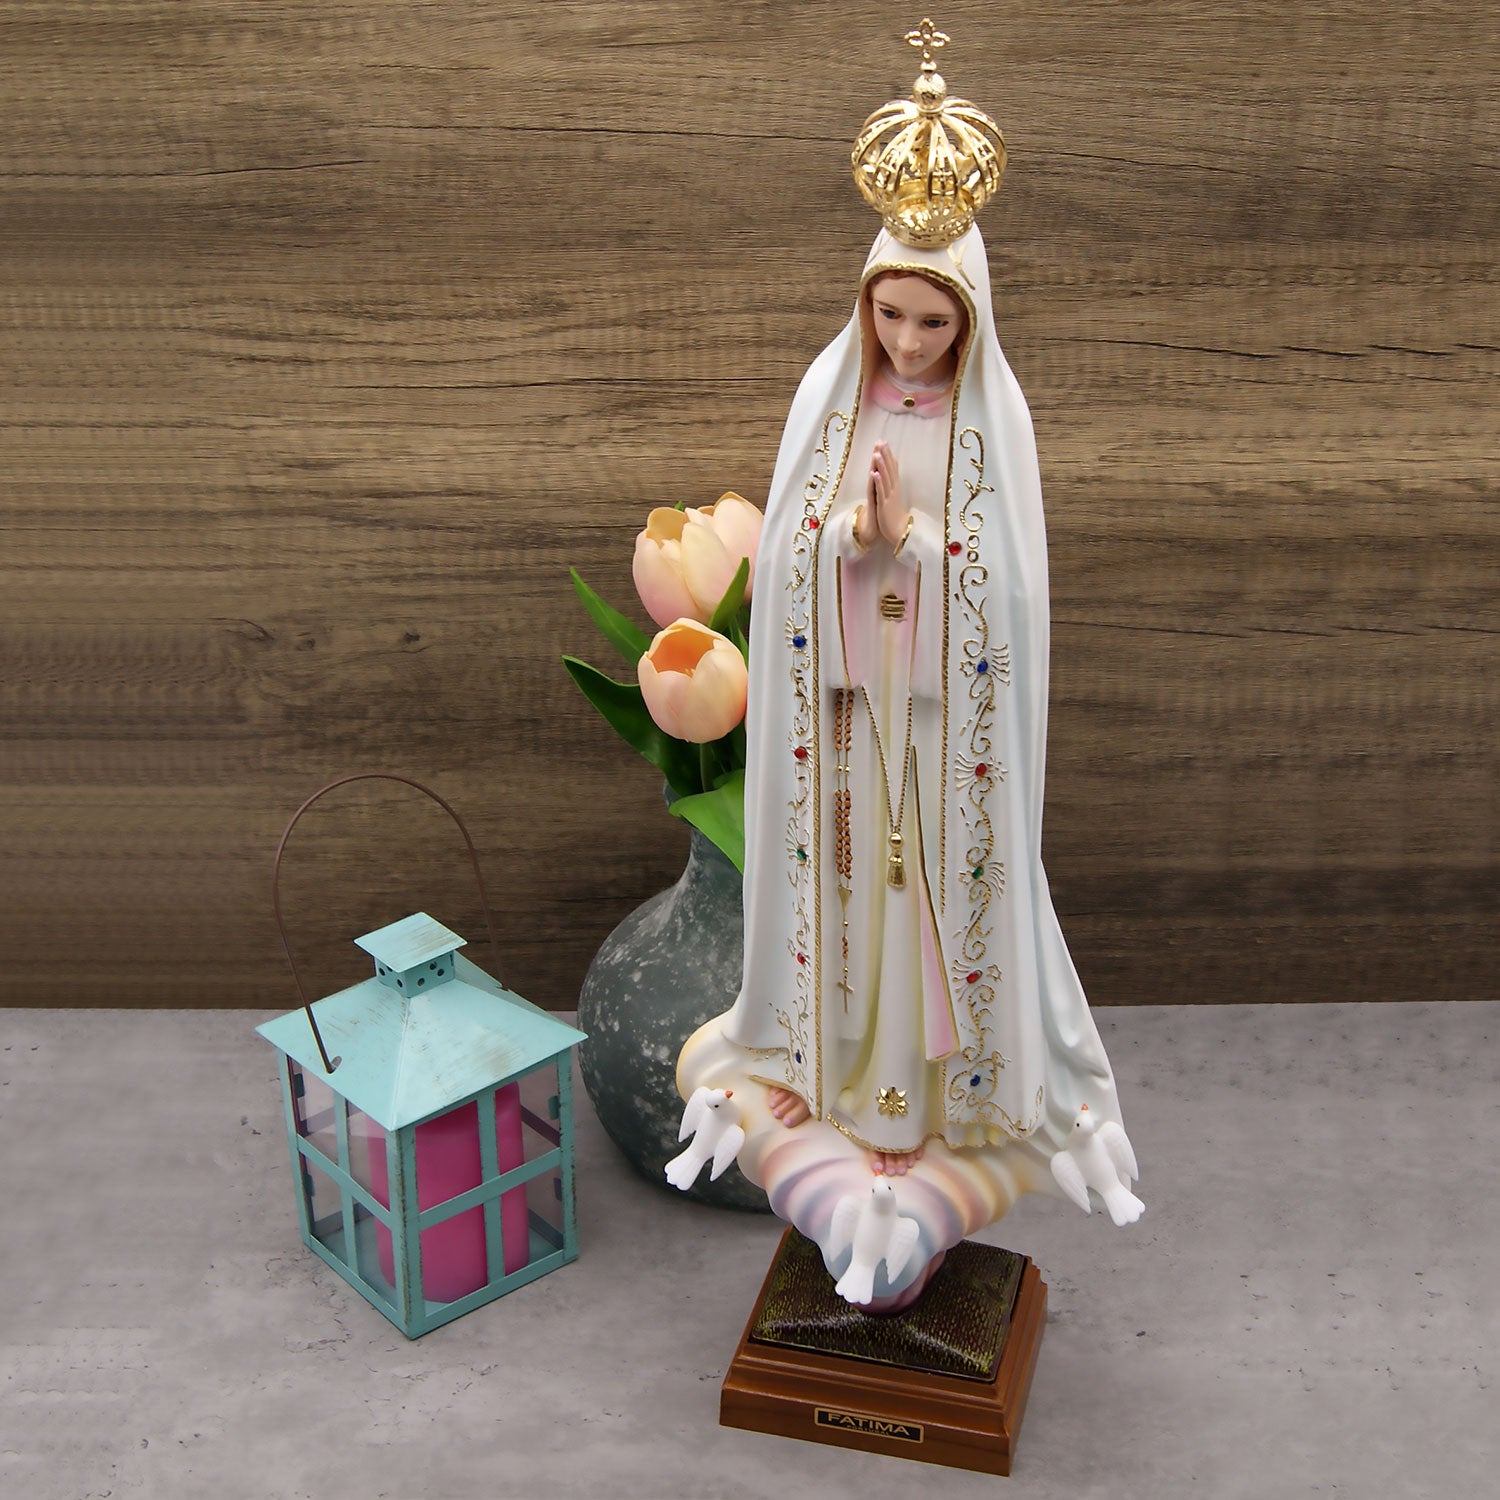 24 Inch Glass Eyes Our Lady of Fatima Statue Made in Portugal